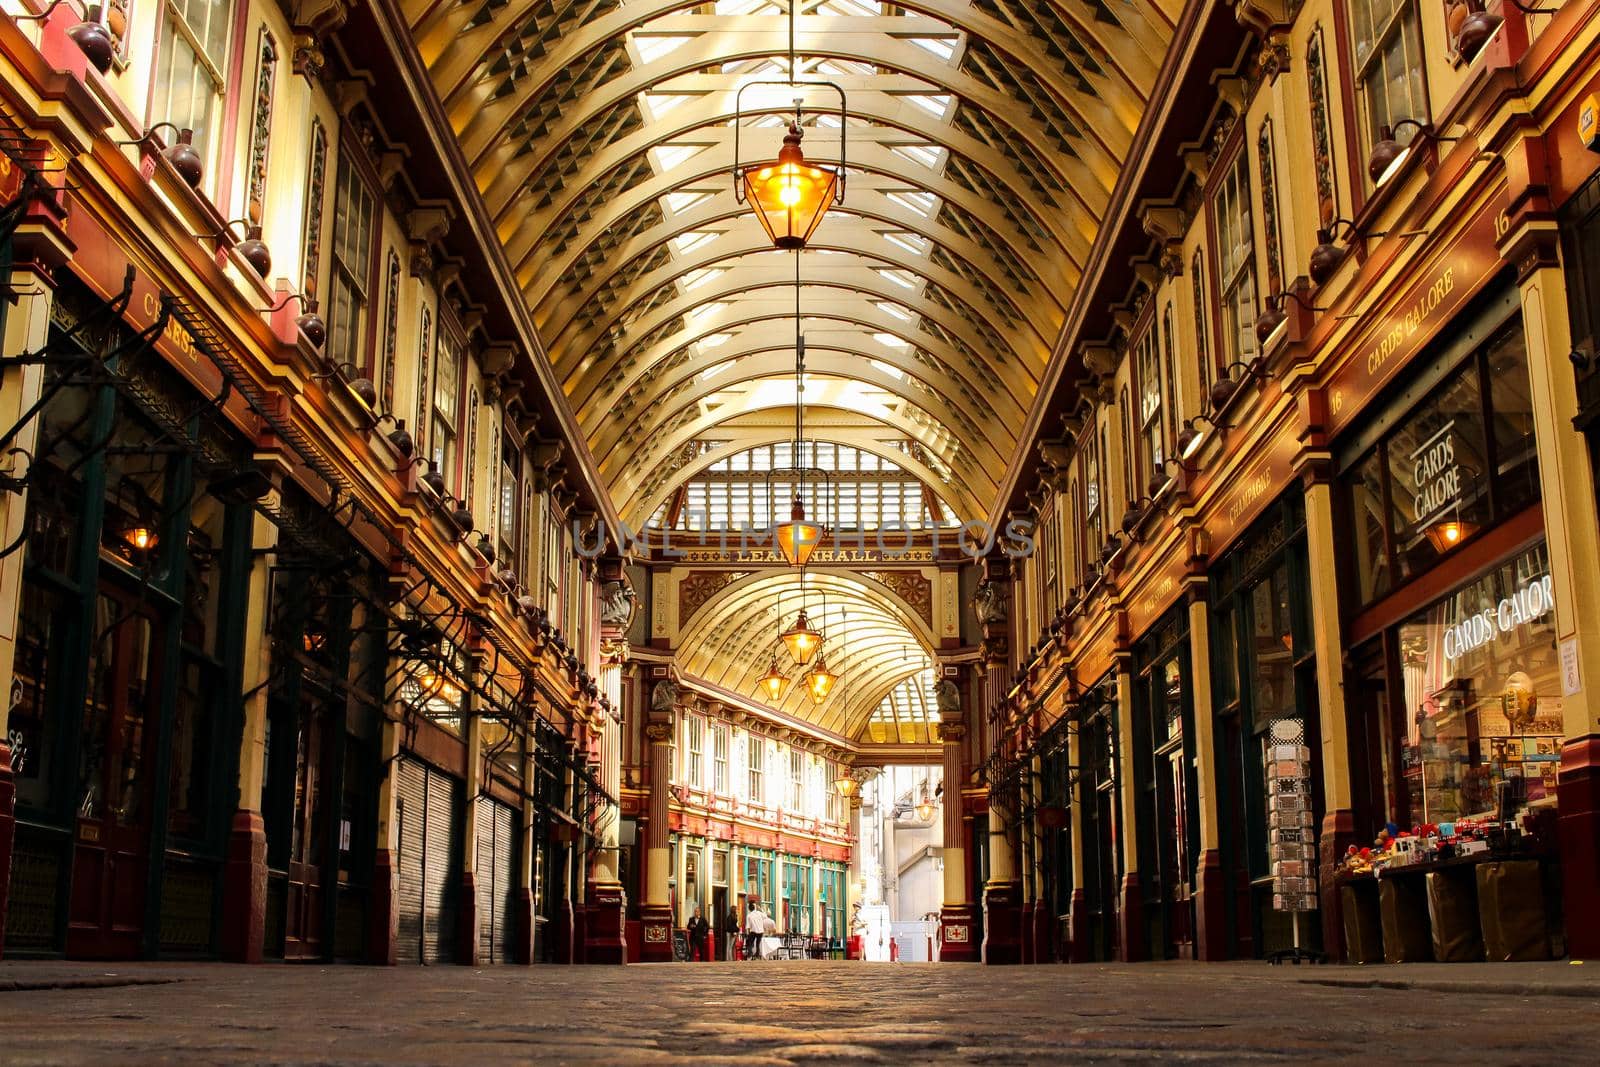 'Leadenhall market' stores and architecture from a worms' eye view, London, UK. by olifrenchphoto